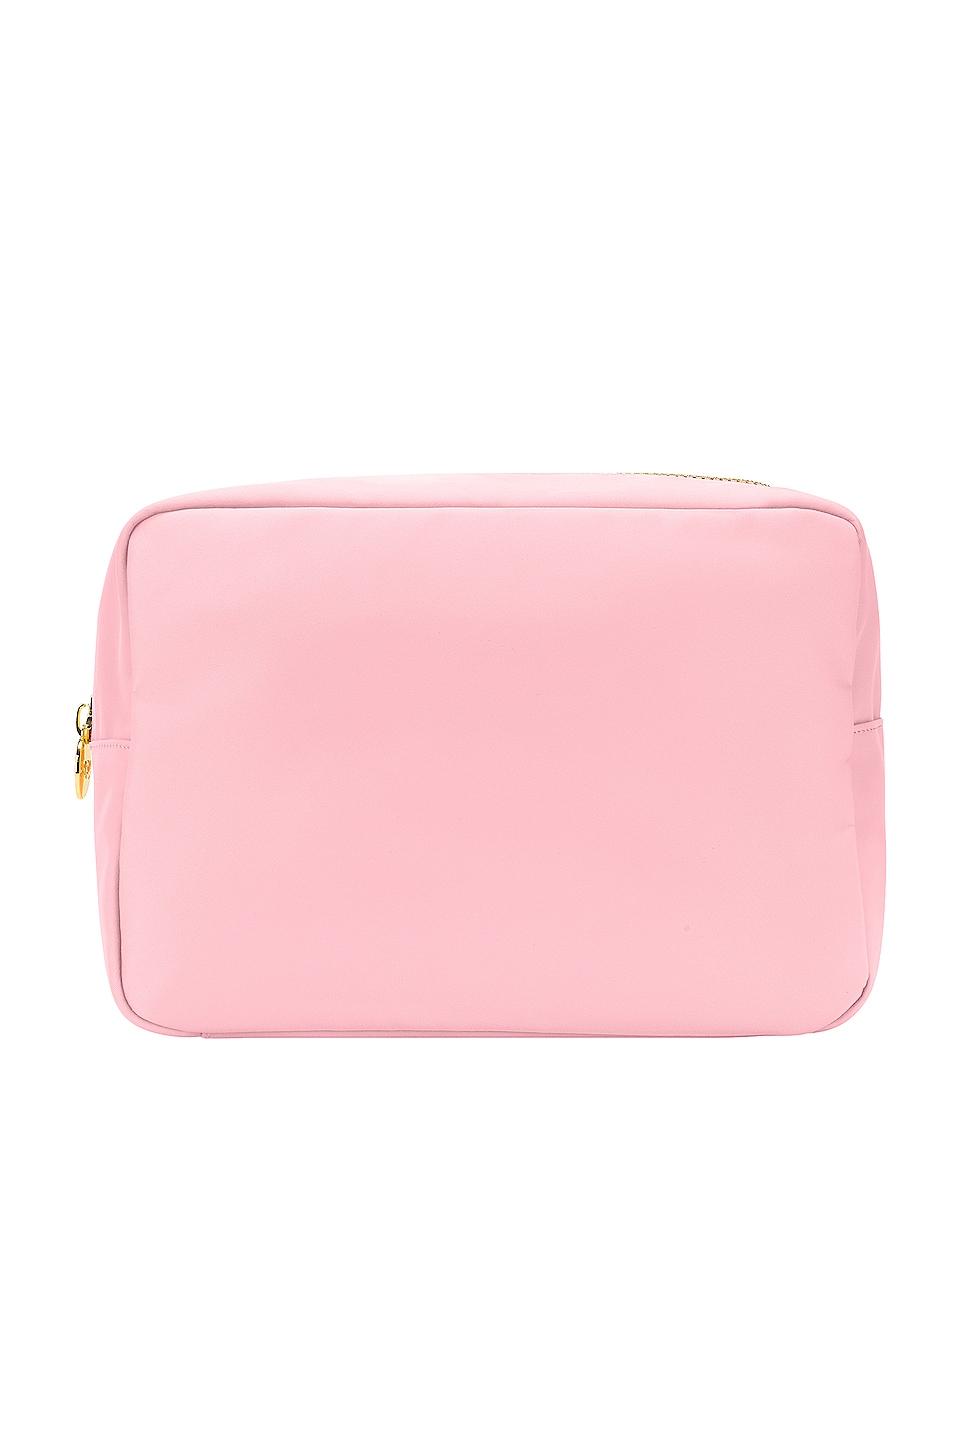 Stoney Clover Lane Classic Large Pouch in Flamingo | REVOLVE